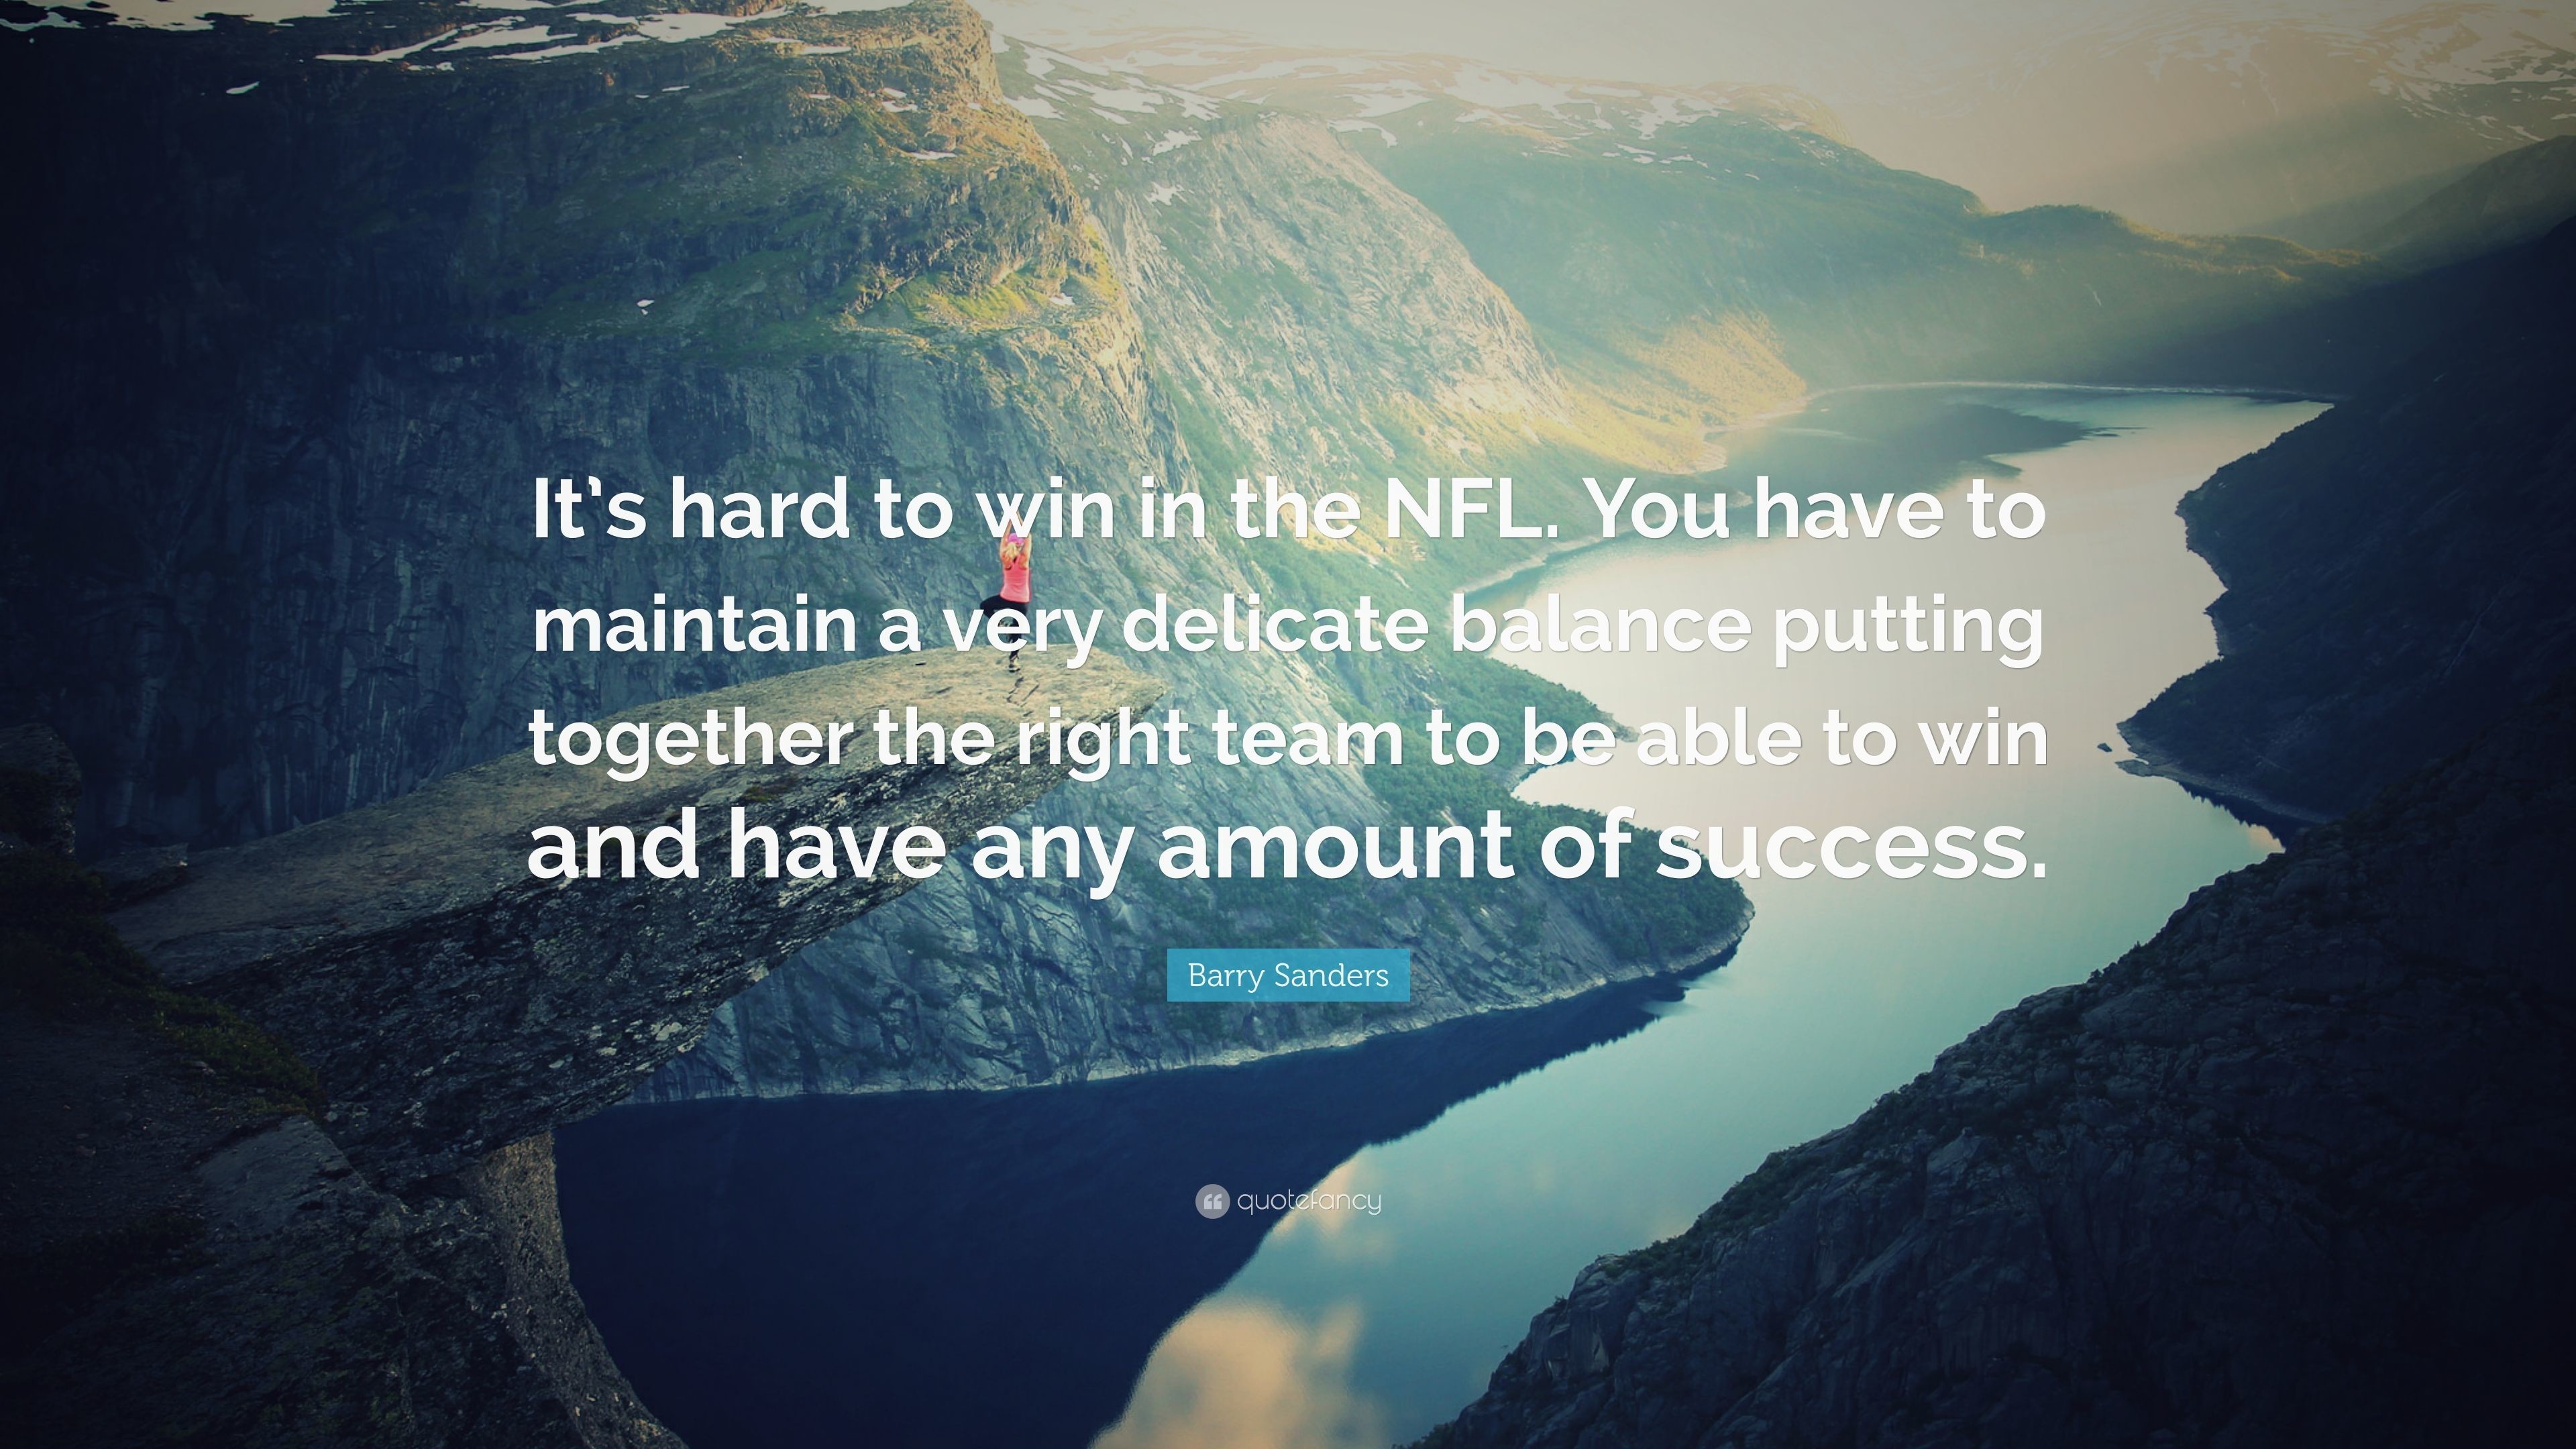 3840x2160 Barry Sanders Quote: “It's hard to win in the NFL. You have to